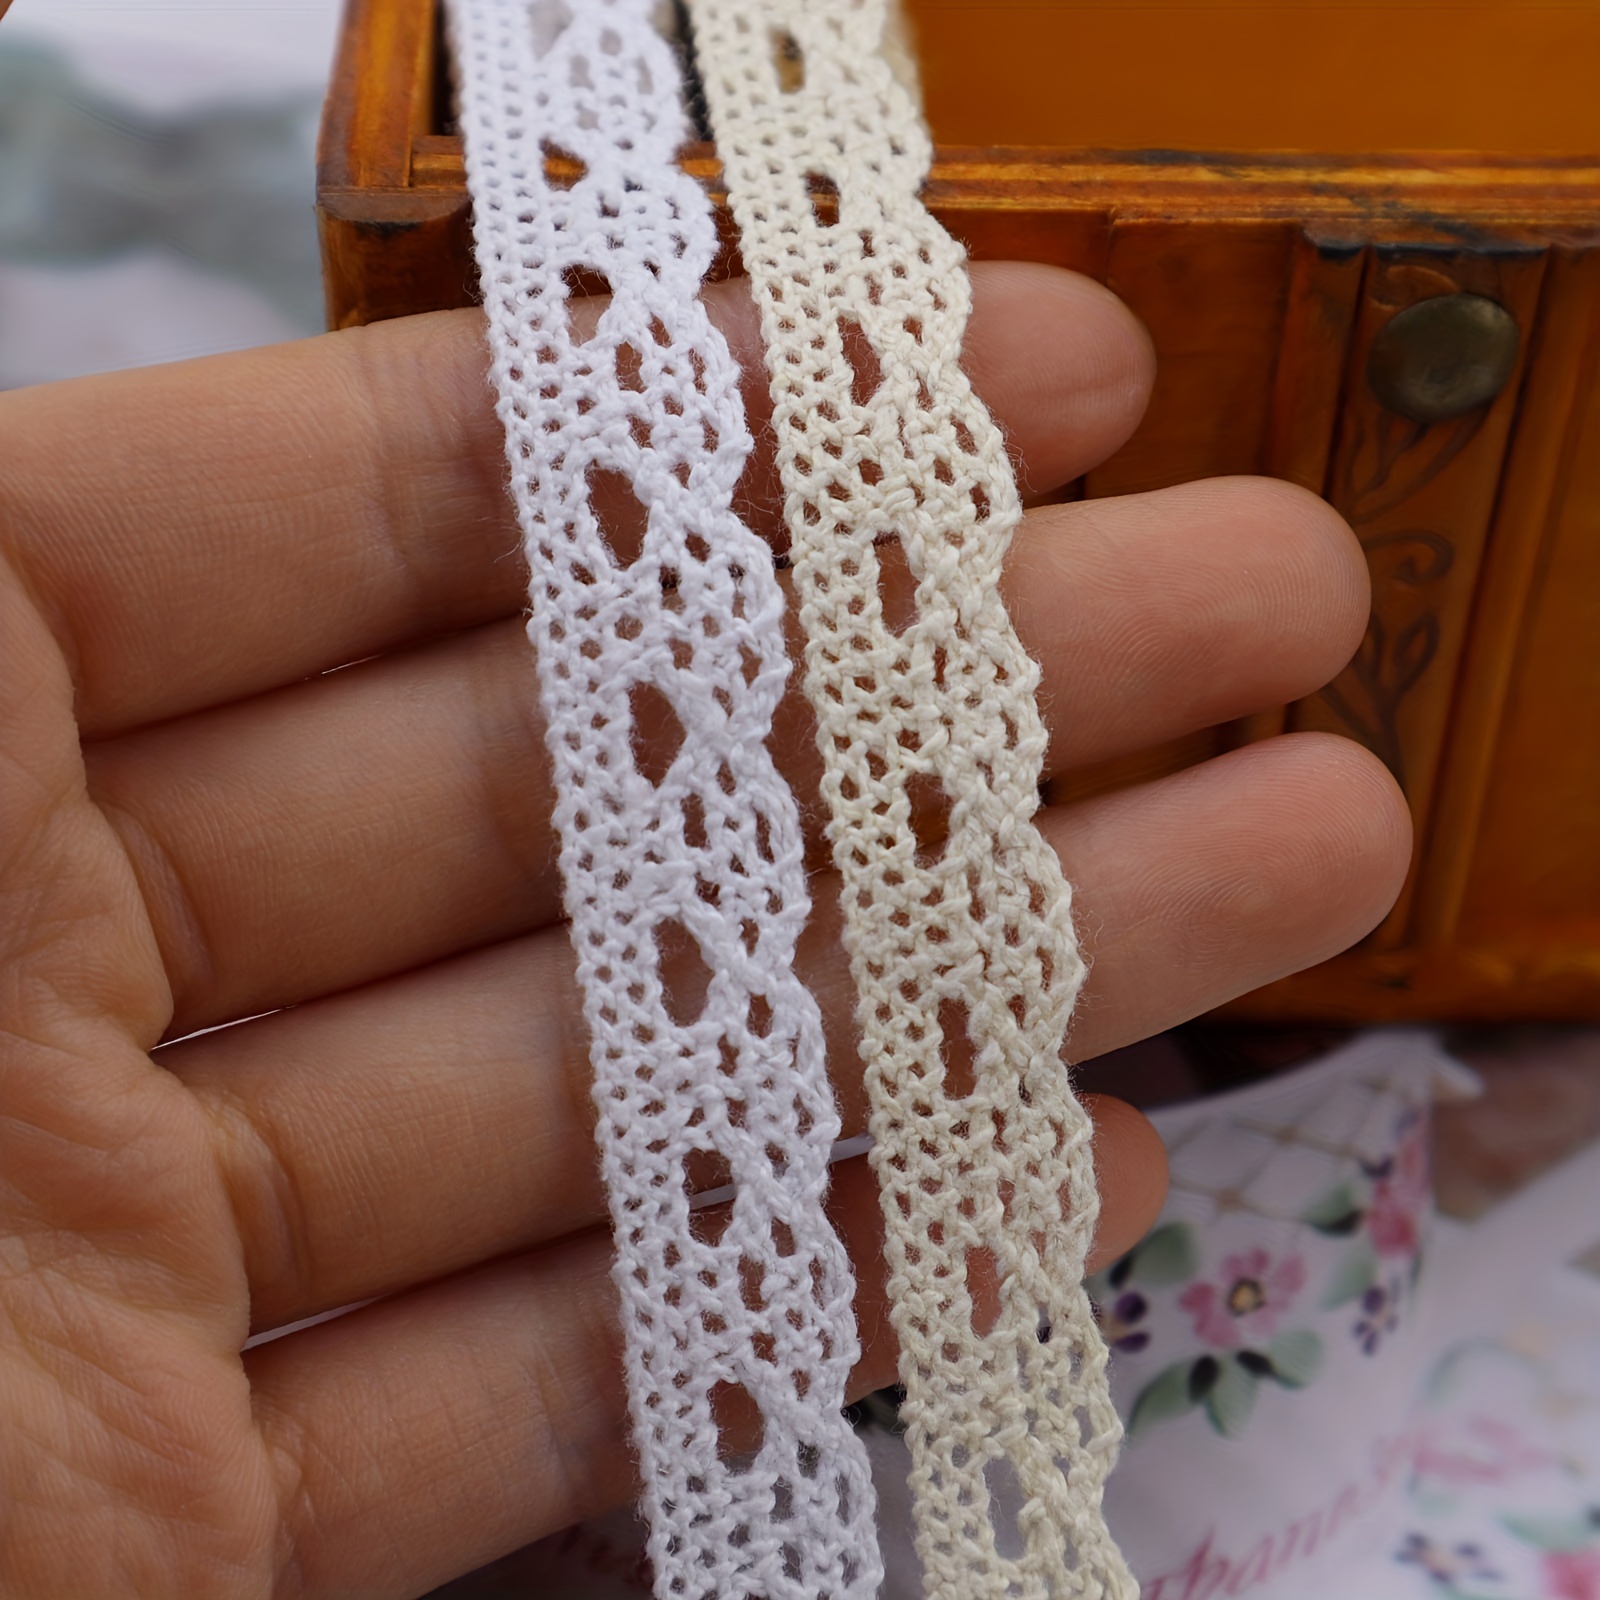 20 Yards Lace Ribbon Cotton White Lace Trims Delicate Bridal Lace Trim  Scallop Edge For Sewing, Craft, Home Decoration